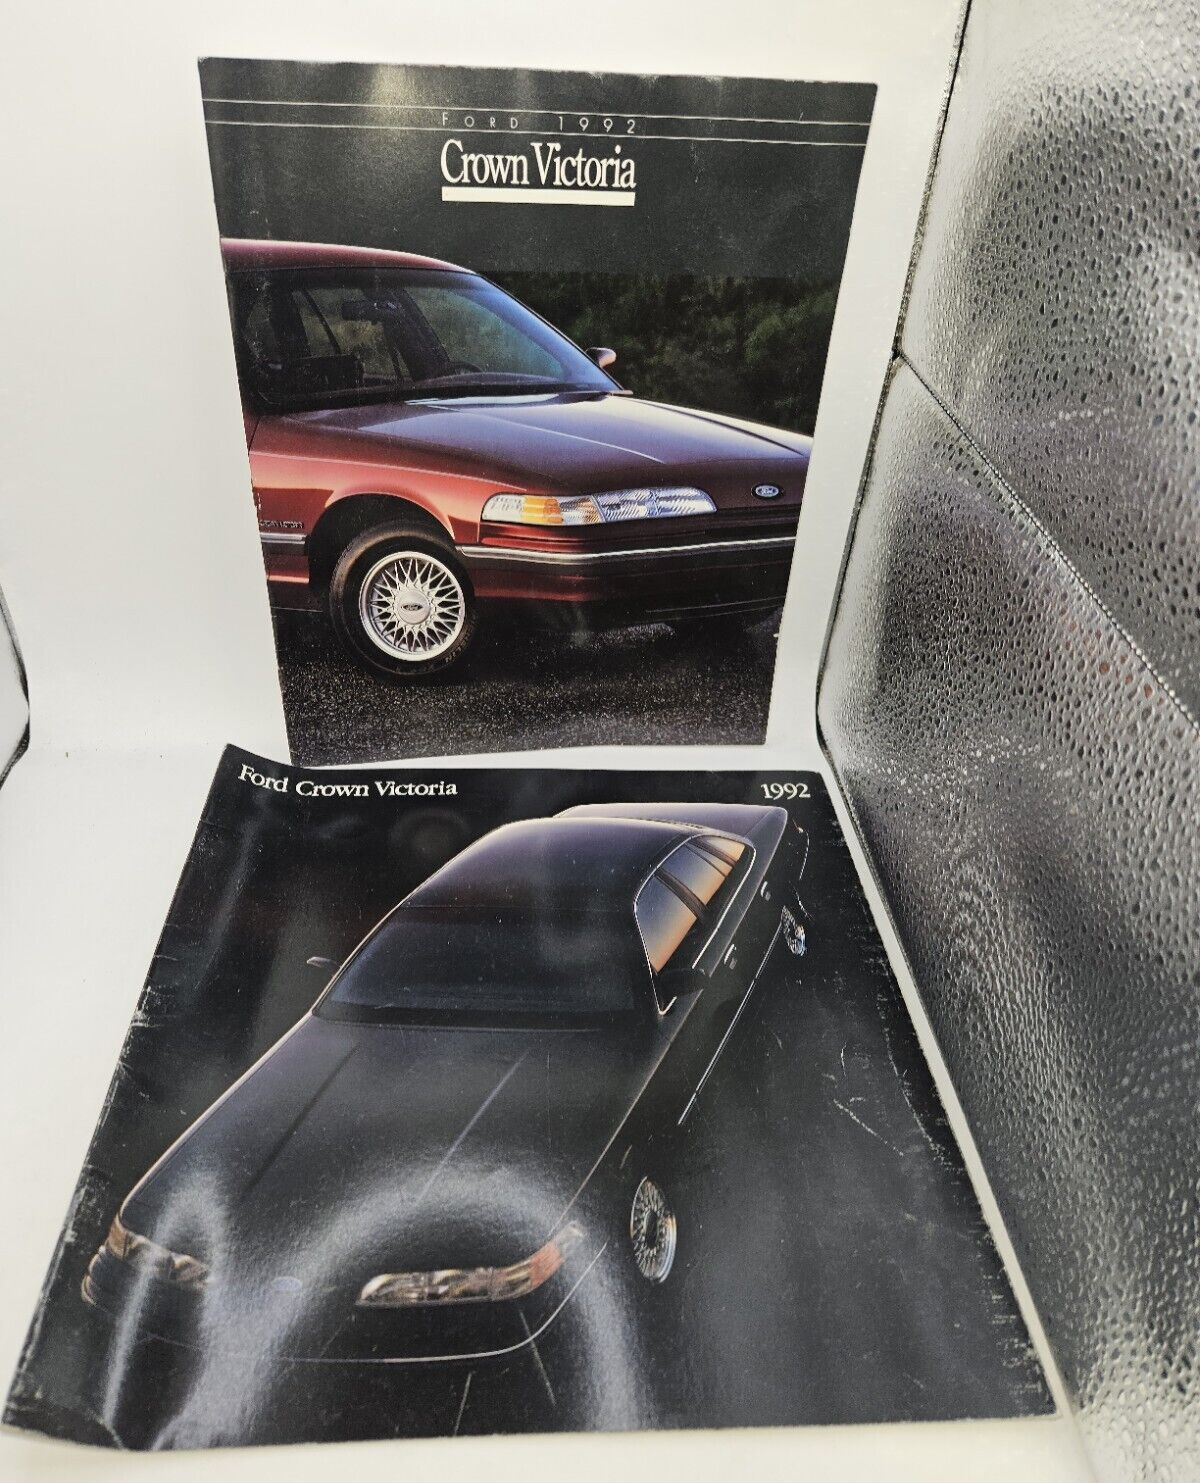 TWO 1992 Ford Crown Victoria Sales Brochures pamphlets specs colors options etc - $9.74